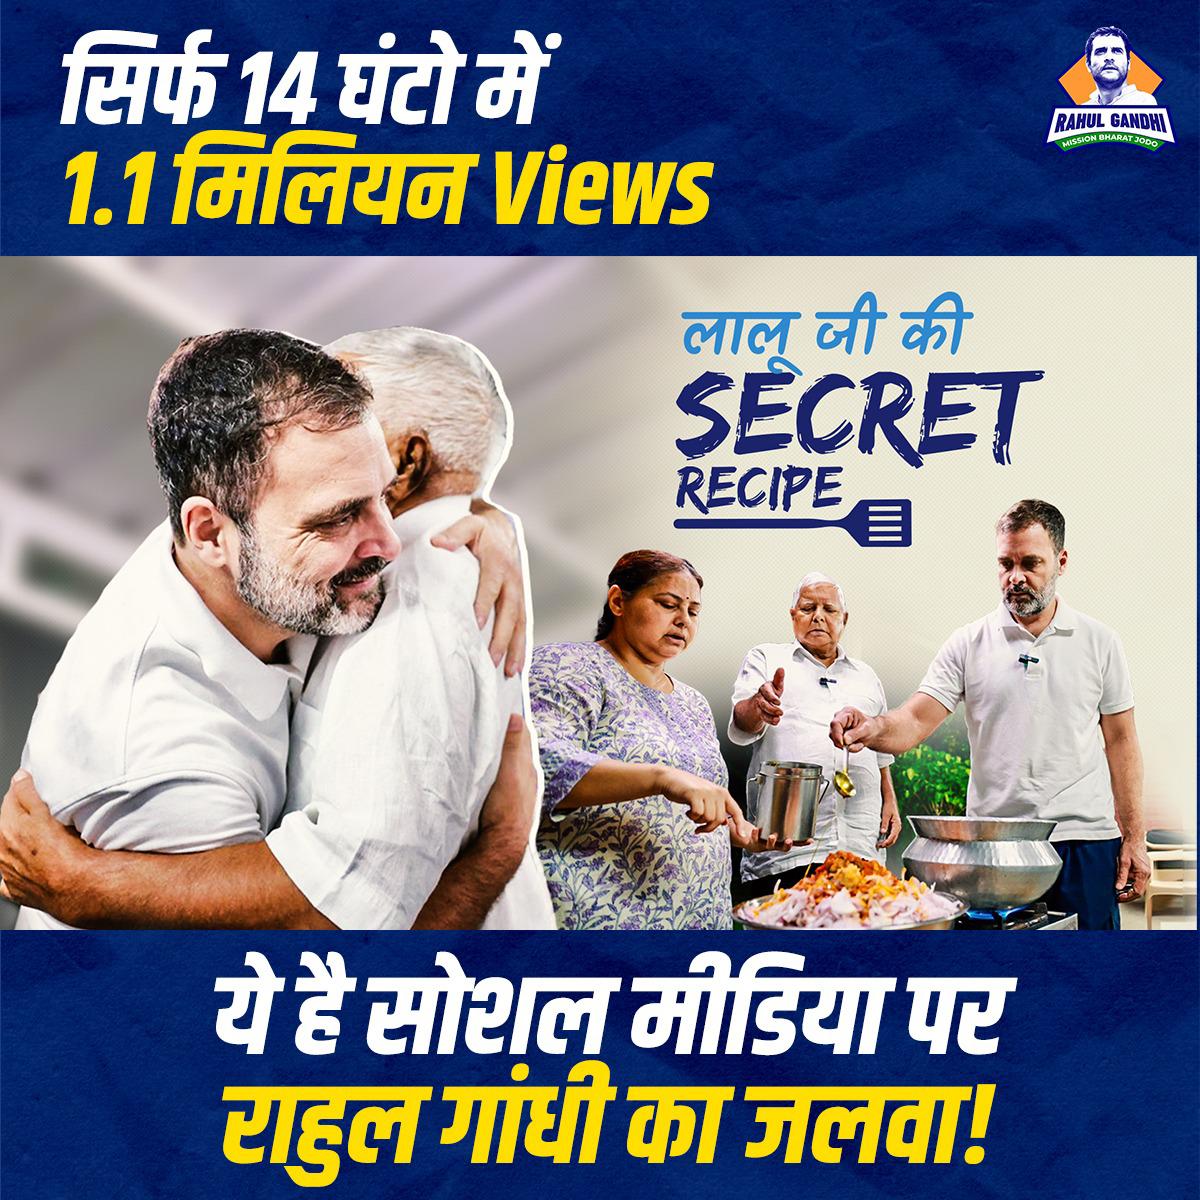 Rahul Gandhi everywhere. Rahul Gsndhi, the name which every Indian says must be our PM next.. 1.1 million views in 14 hrs. Rahul's wave in social media. Chandrayan 3, when Modi started to speak 50%, viewers left the program. Because they didn't want to spoil the festival mood…